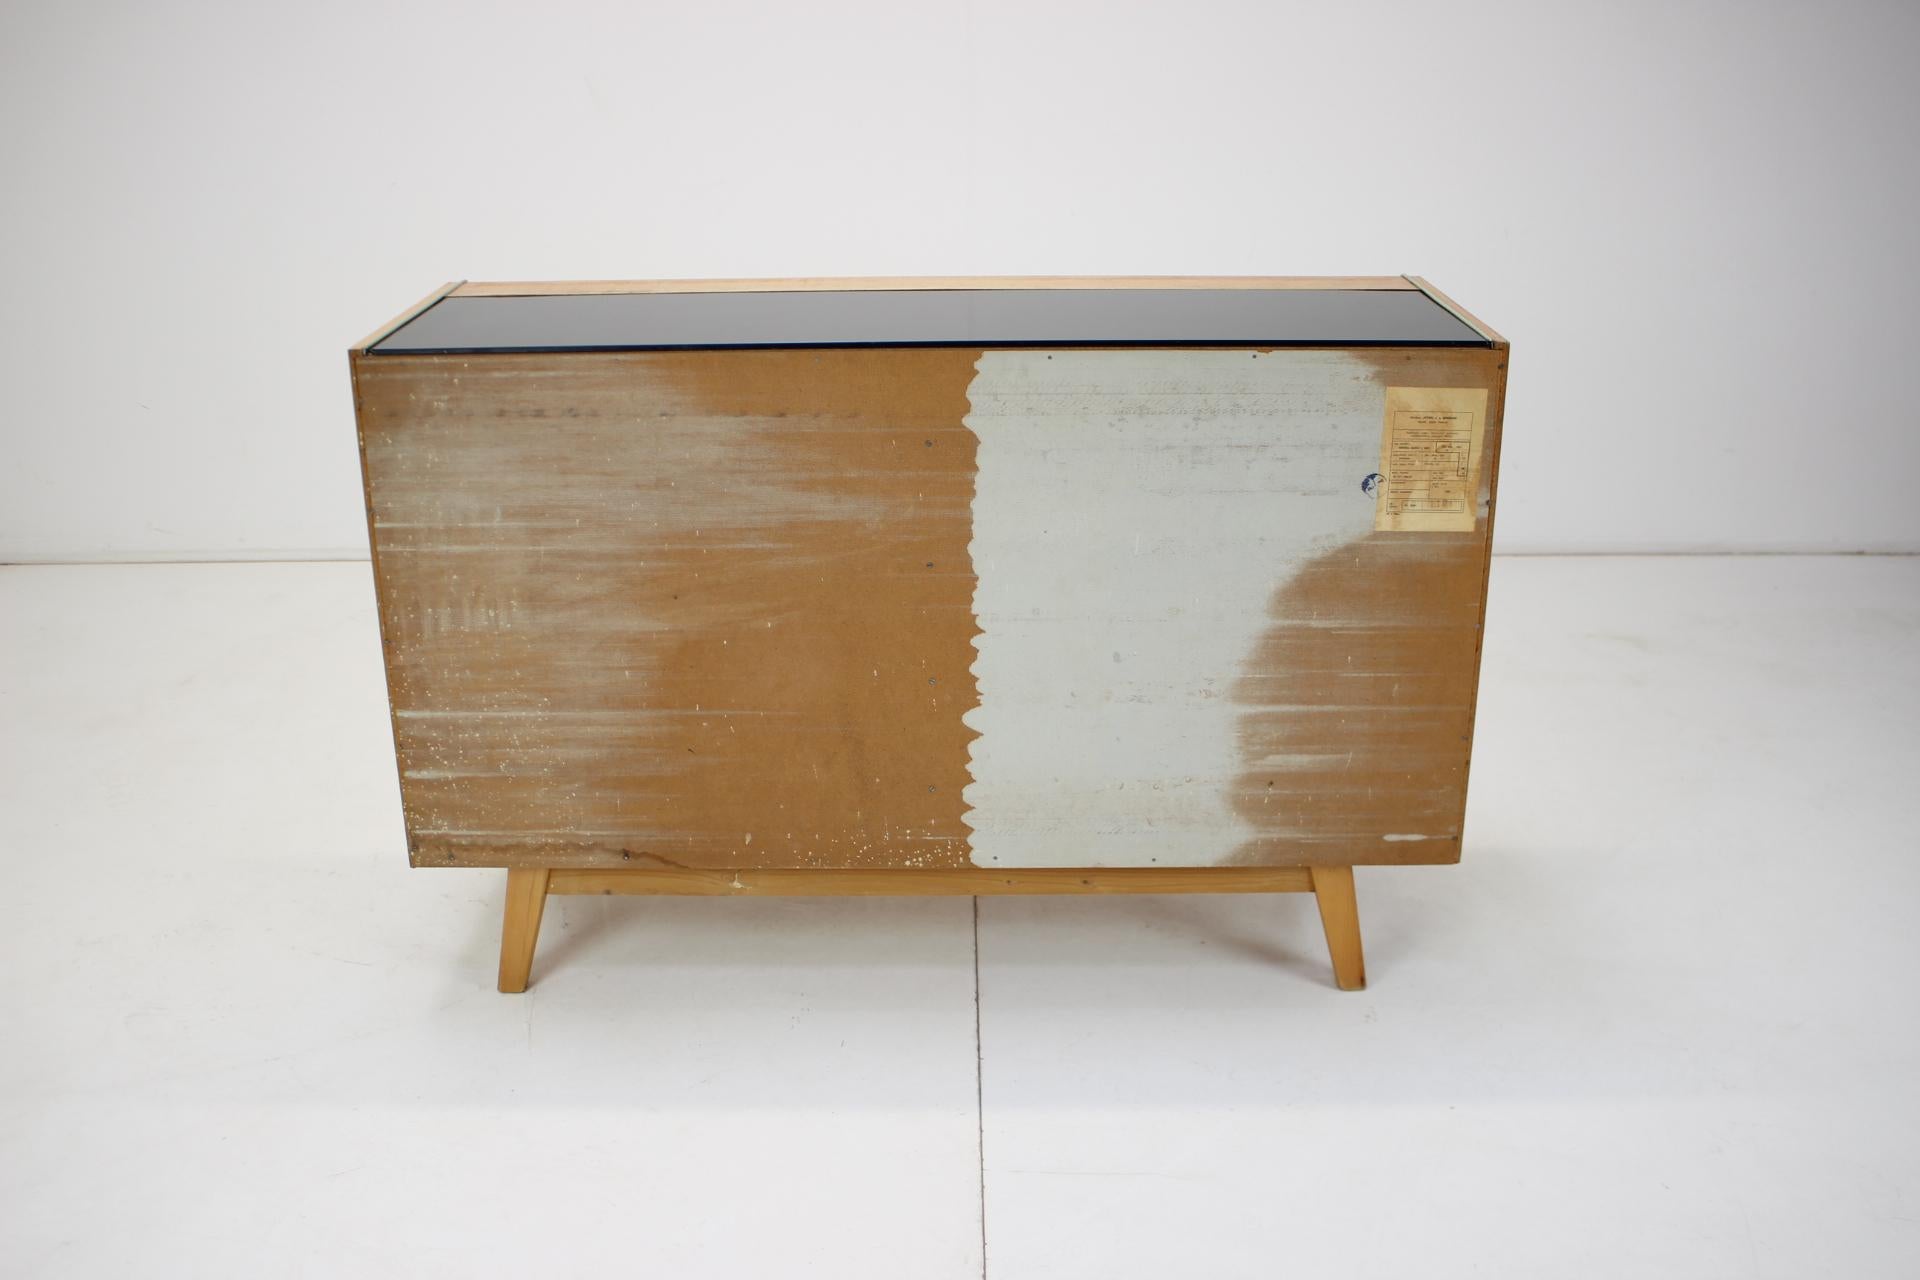 Vintage Cabinet Combination of Veneer and Glass by Jitona, 1960s For Sale 2